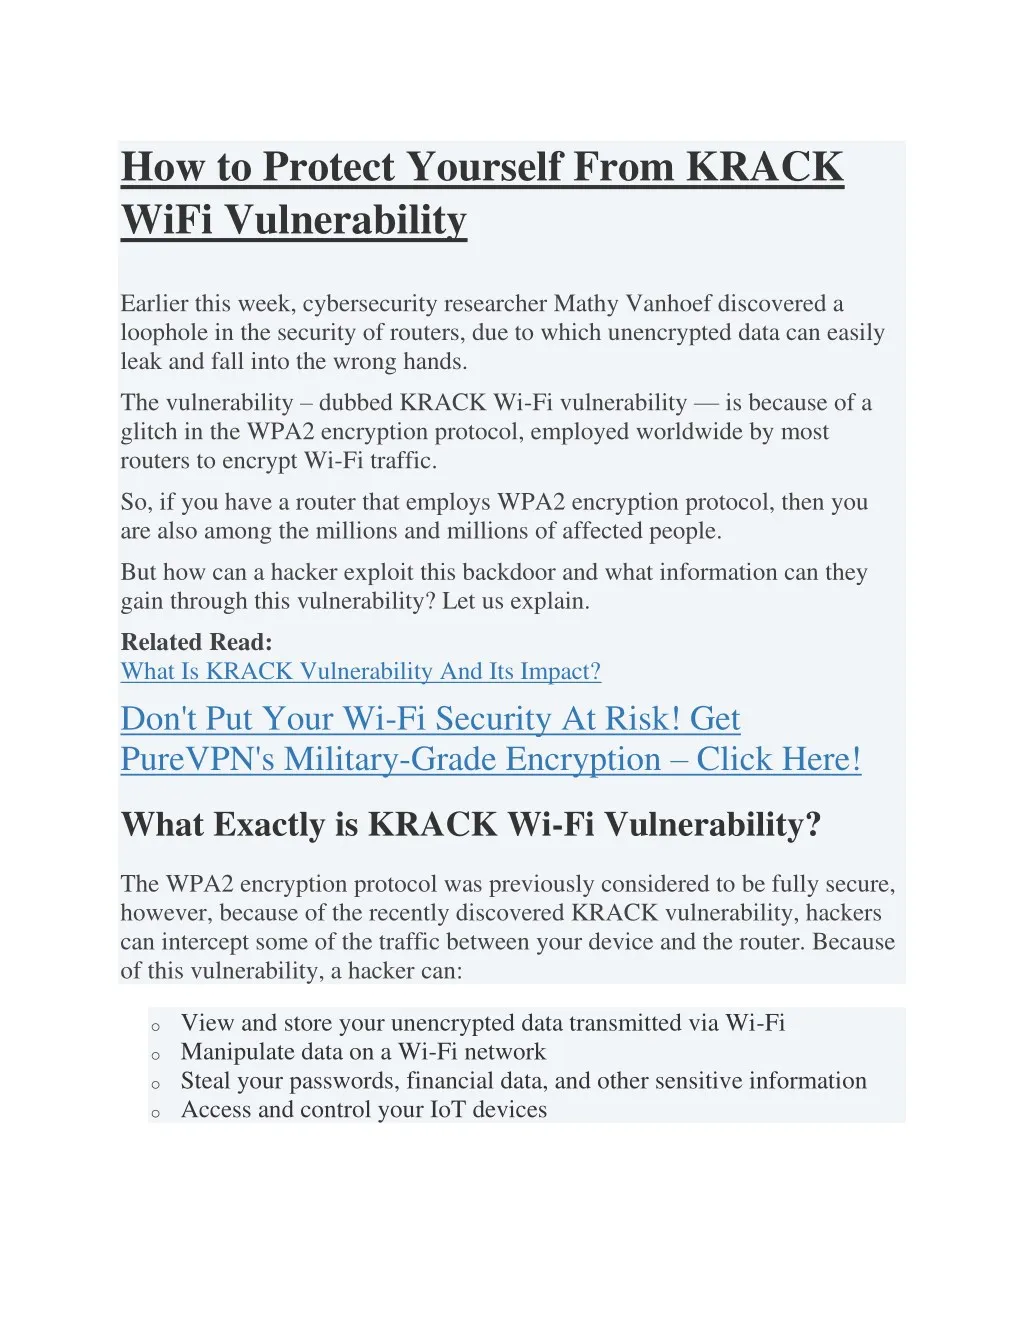 how to protect yourself from krack wifi